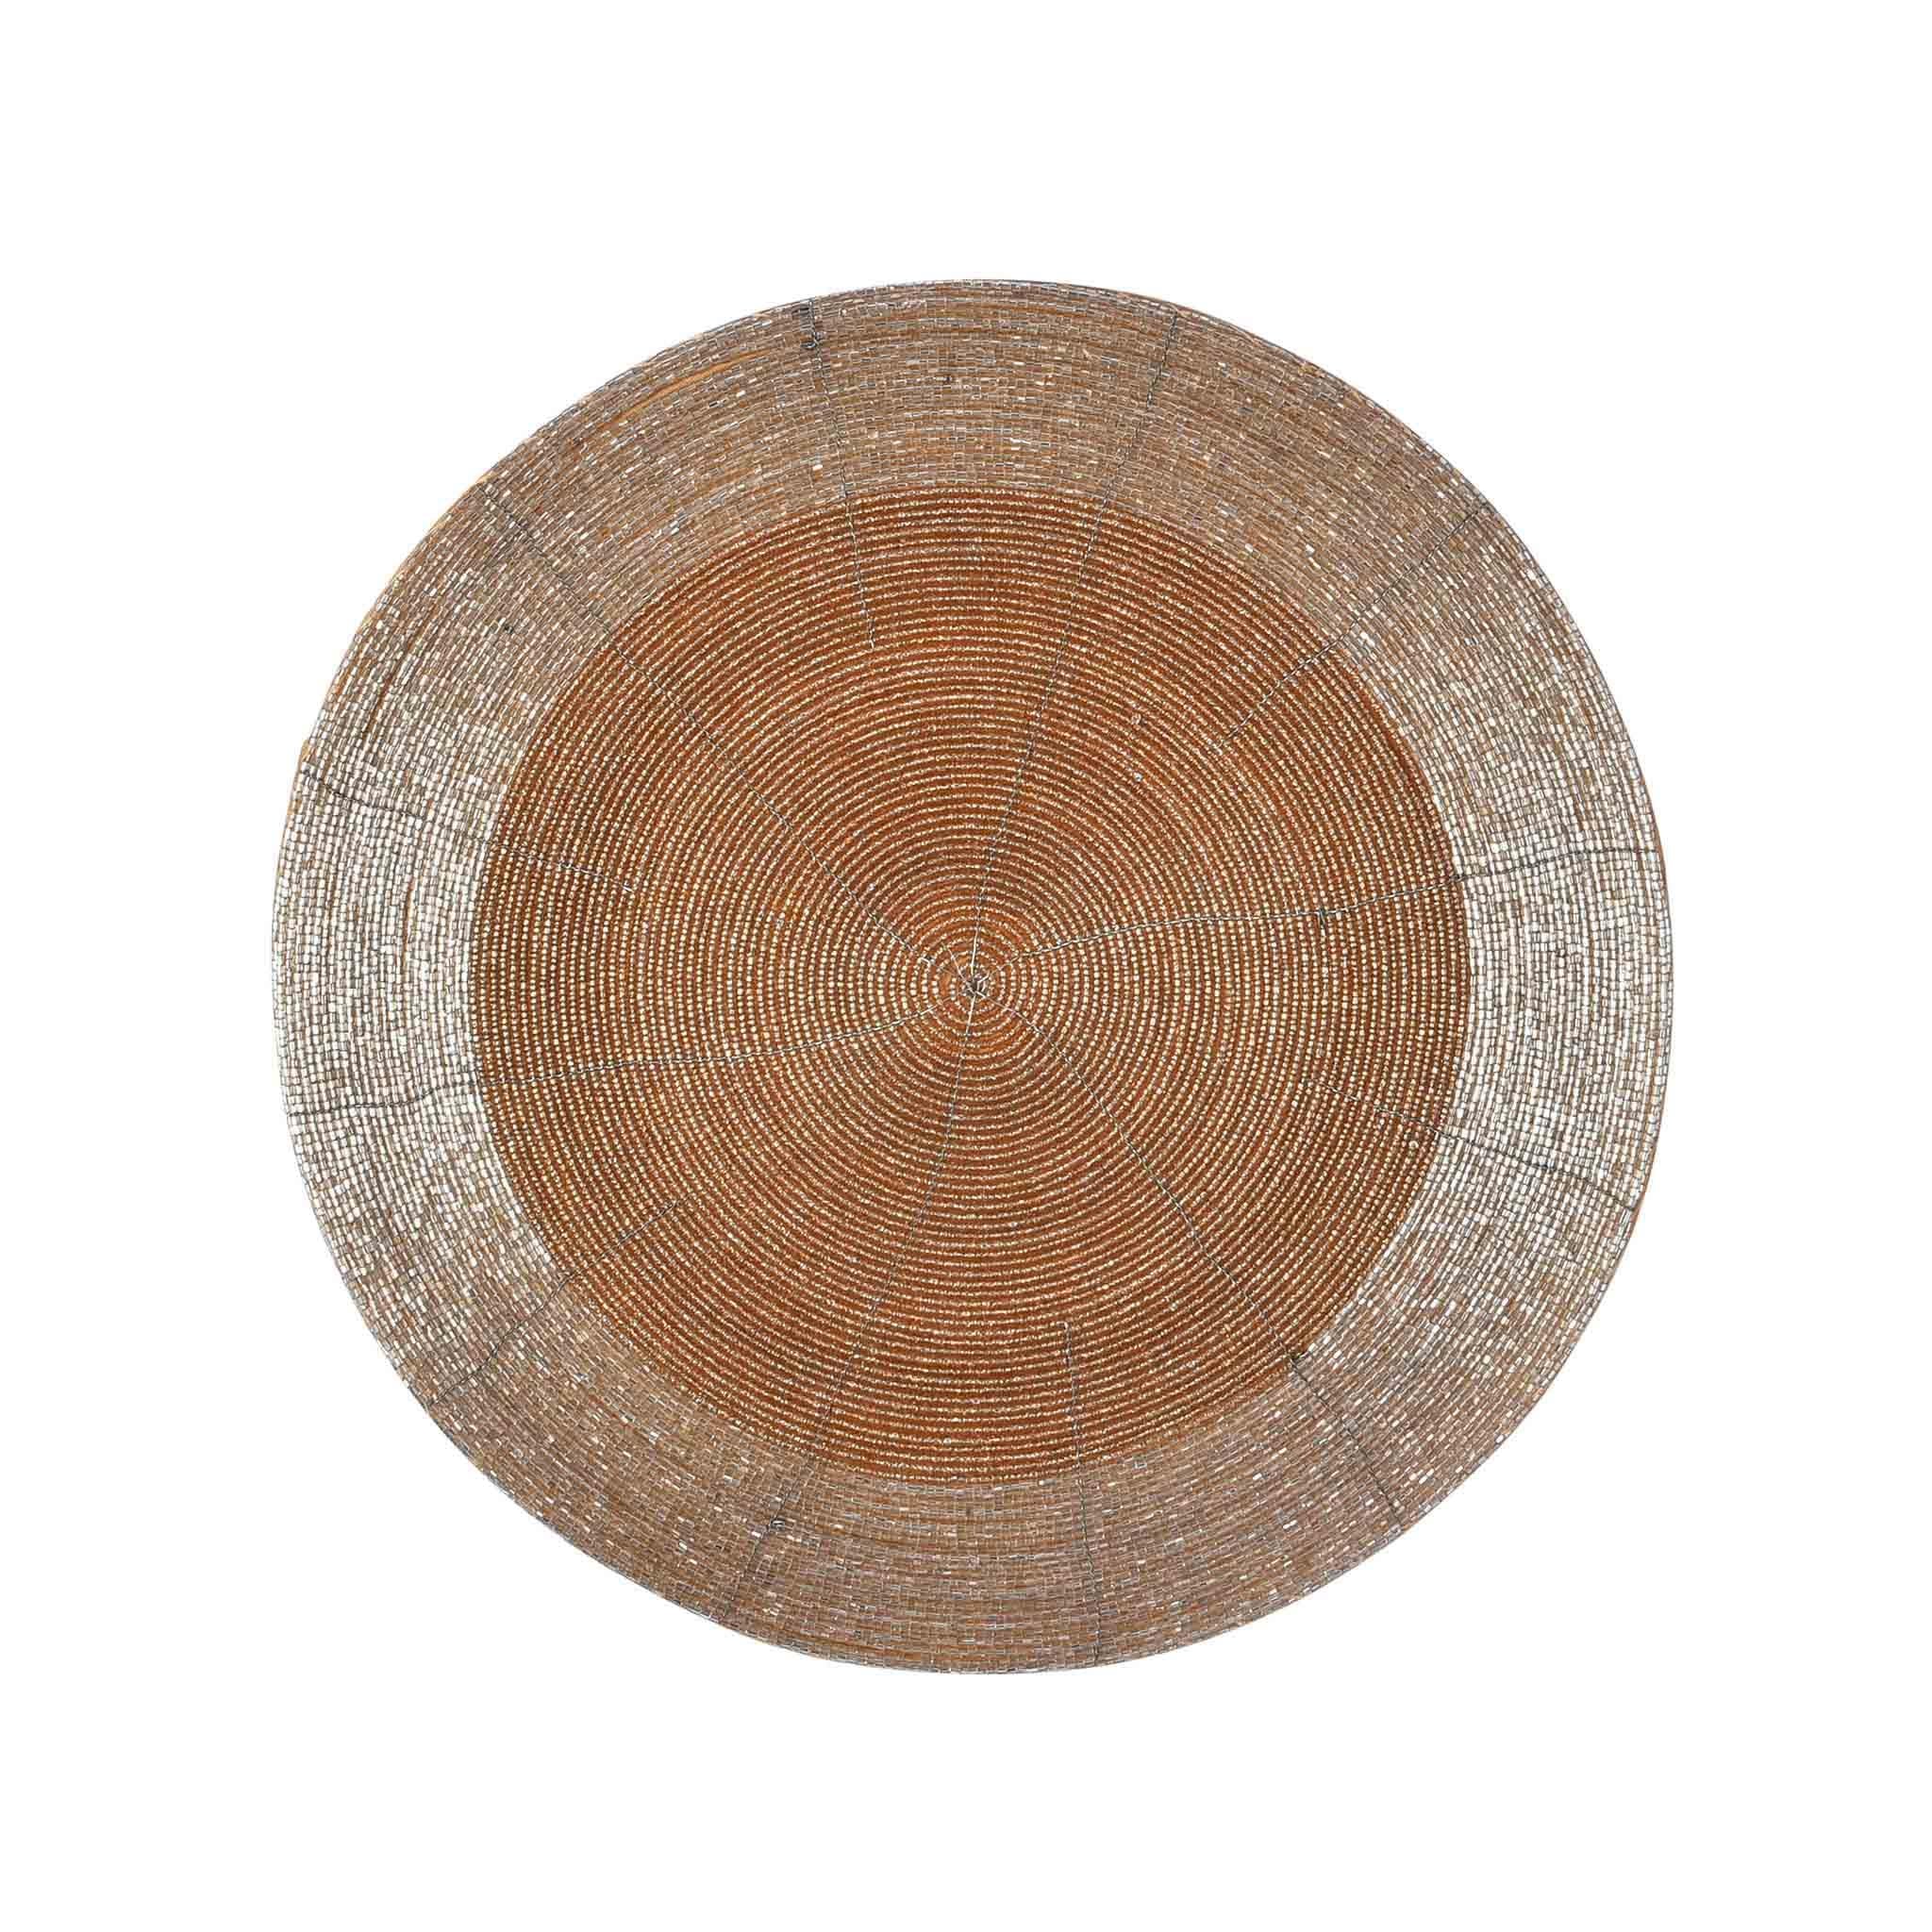 Glass Beaded Placemat <br>Color: Champagne Gold Two-Tone<br>Size: 13.5" Round<br>Set of 4 - Trunkin' USA